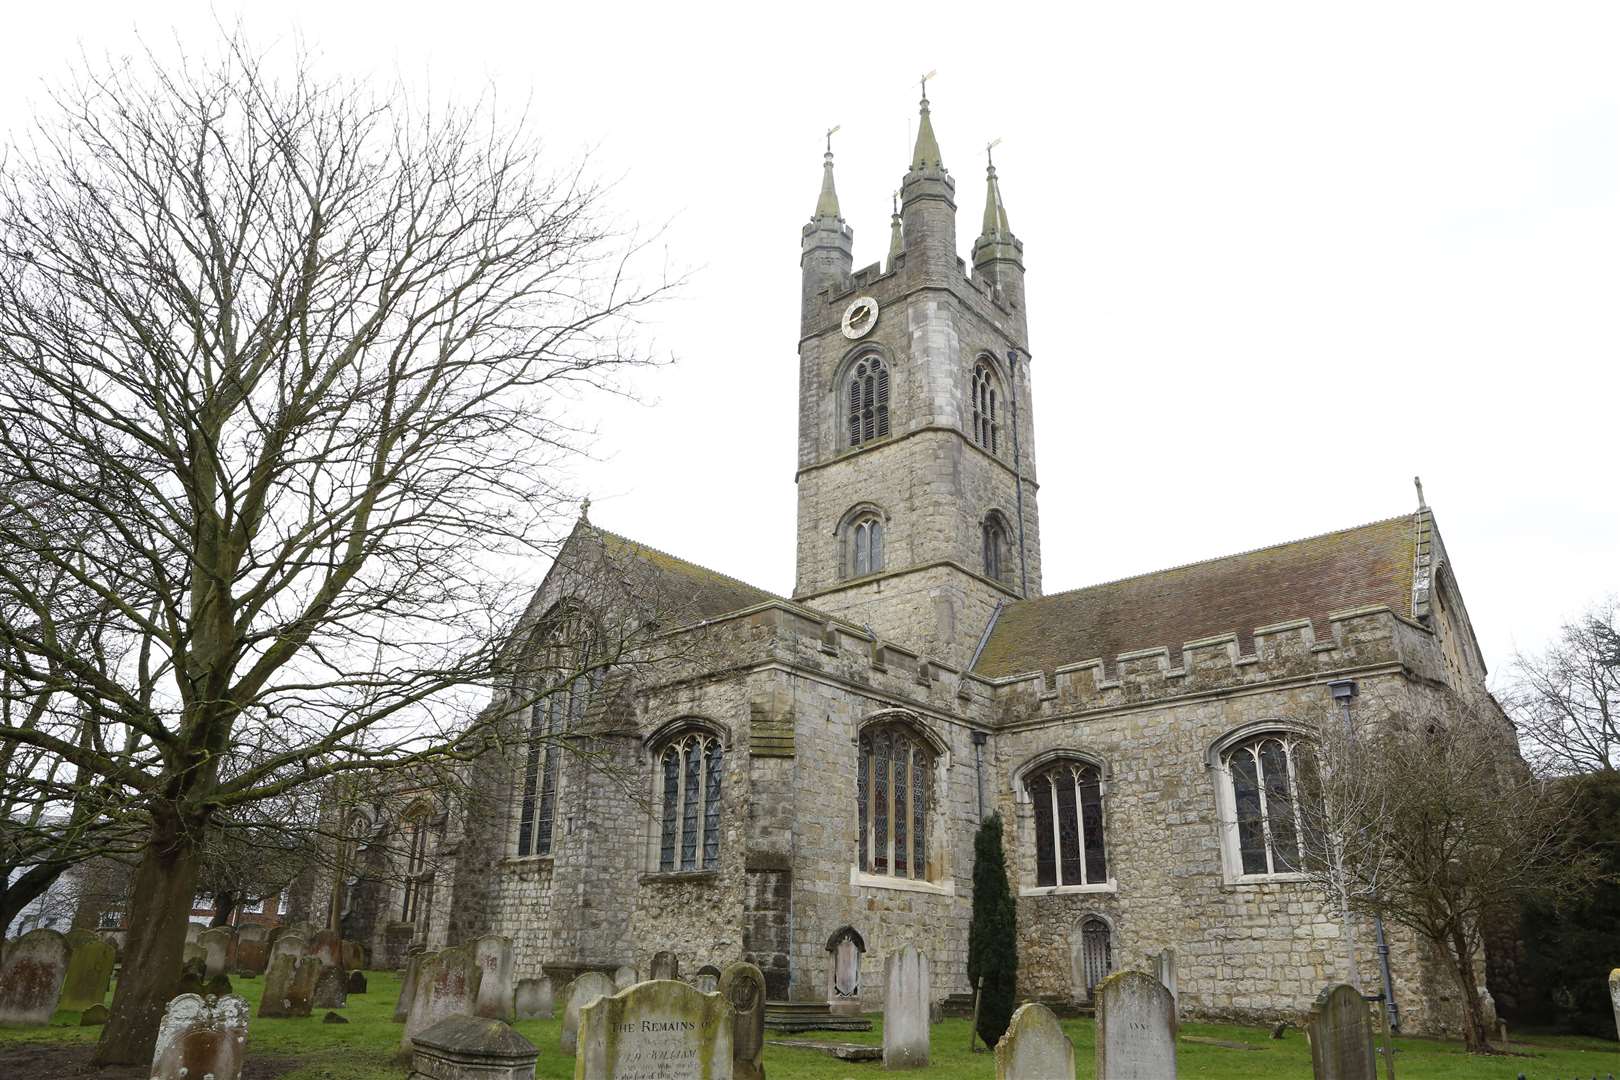 The show will be held in St Mary's Church, Ashford, which doubles up as Revelation theatre